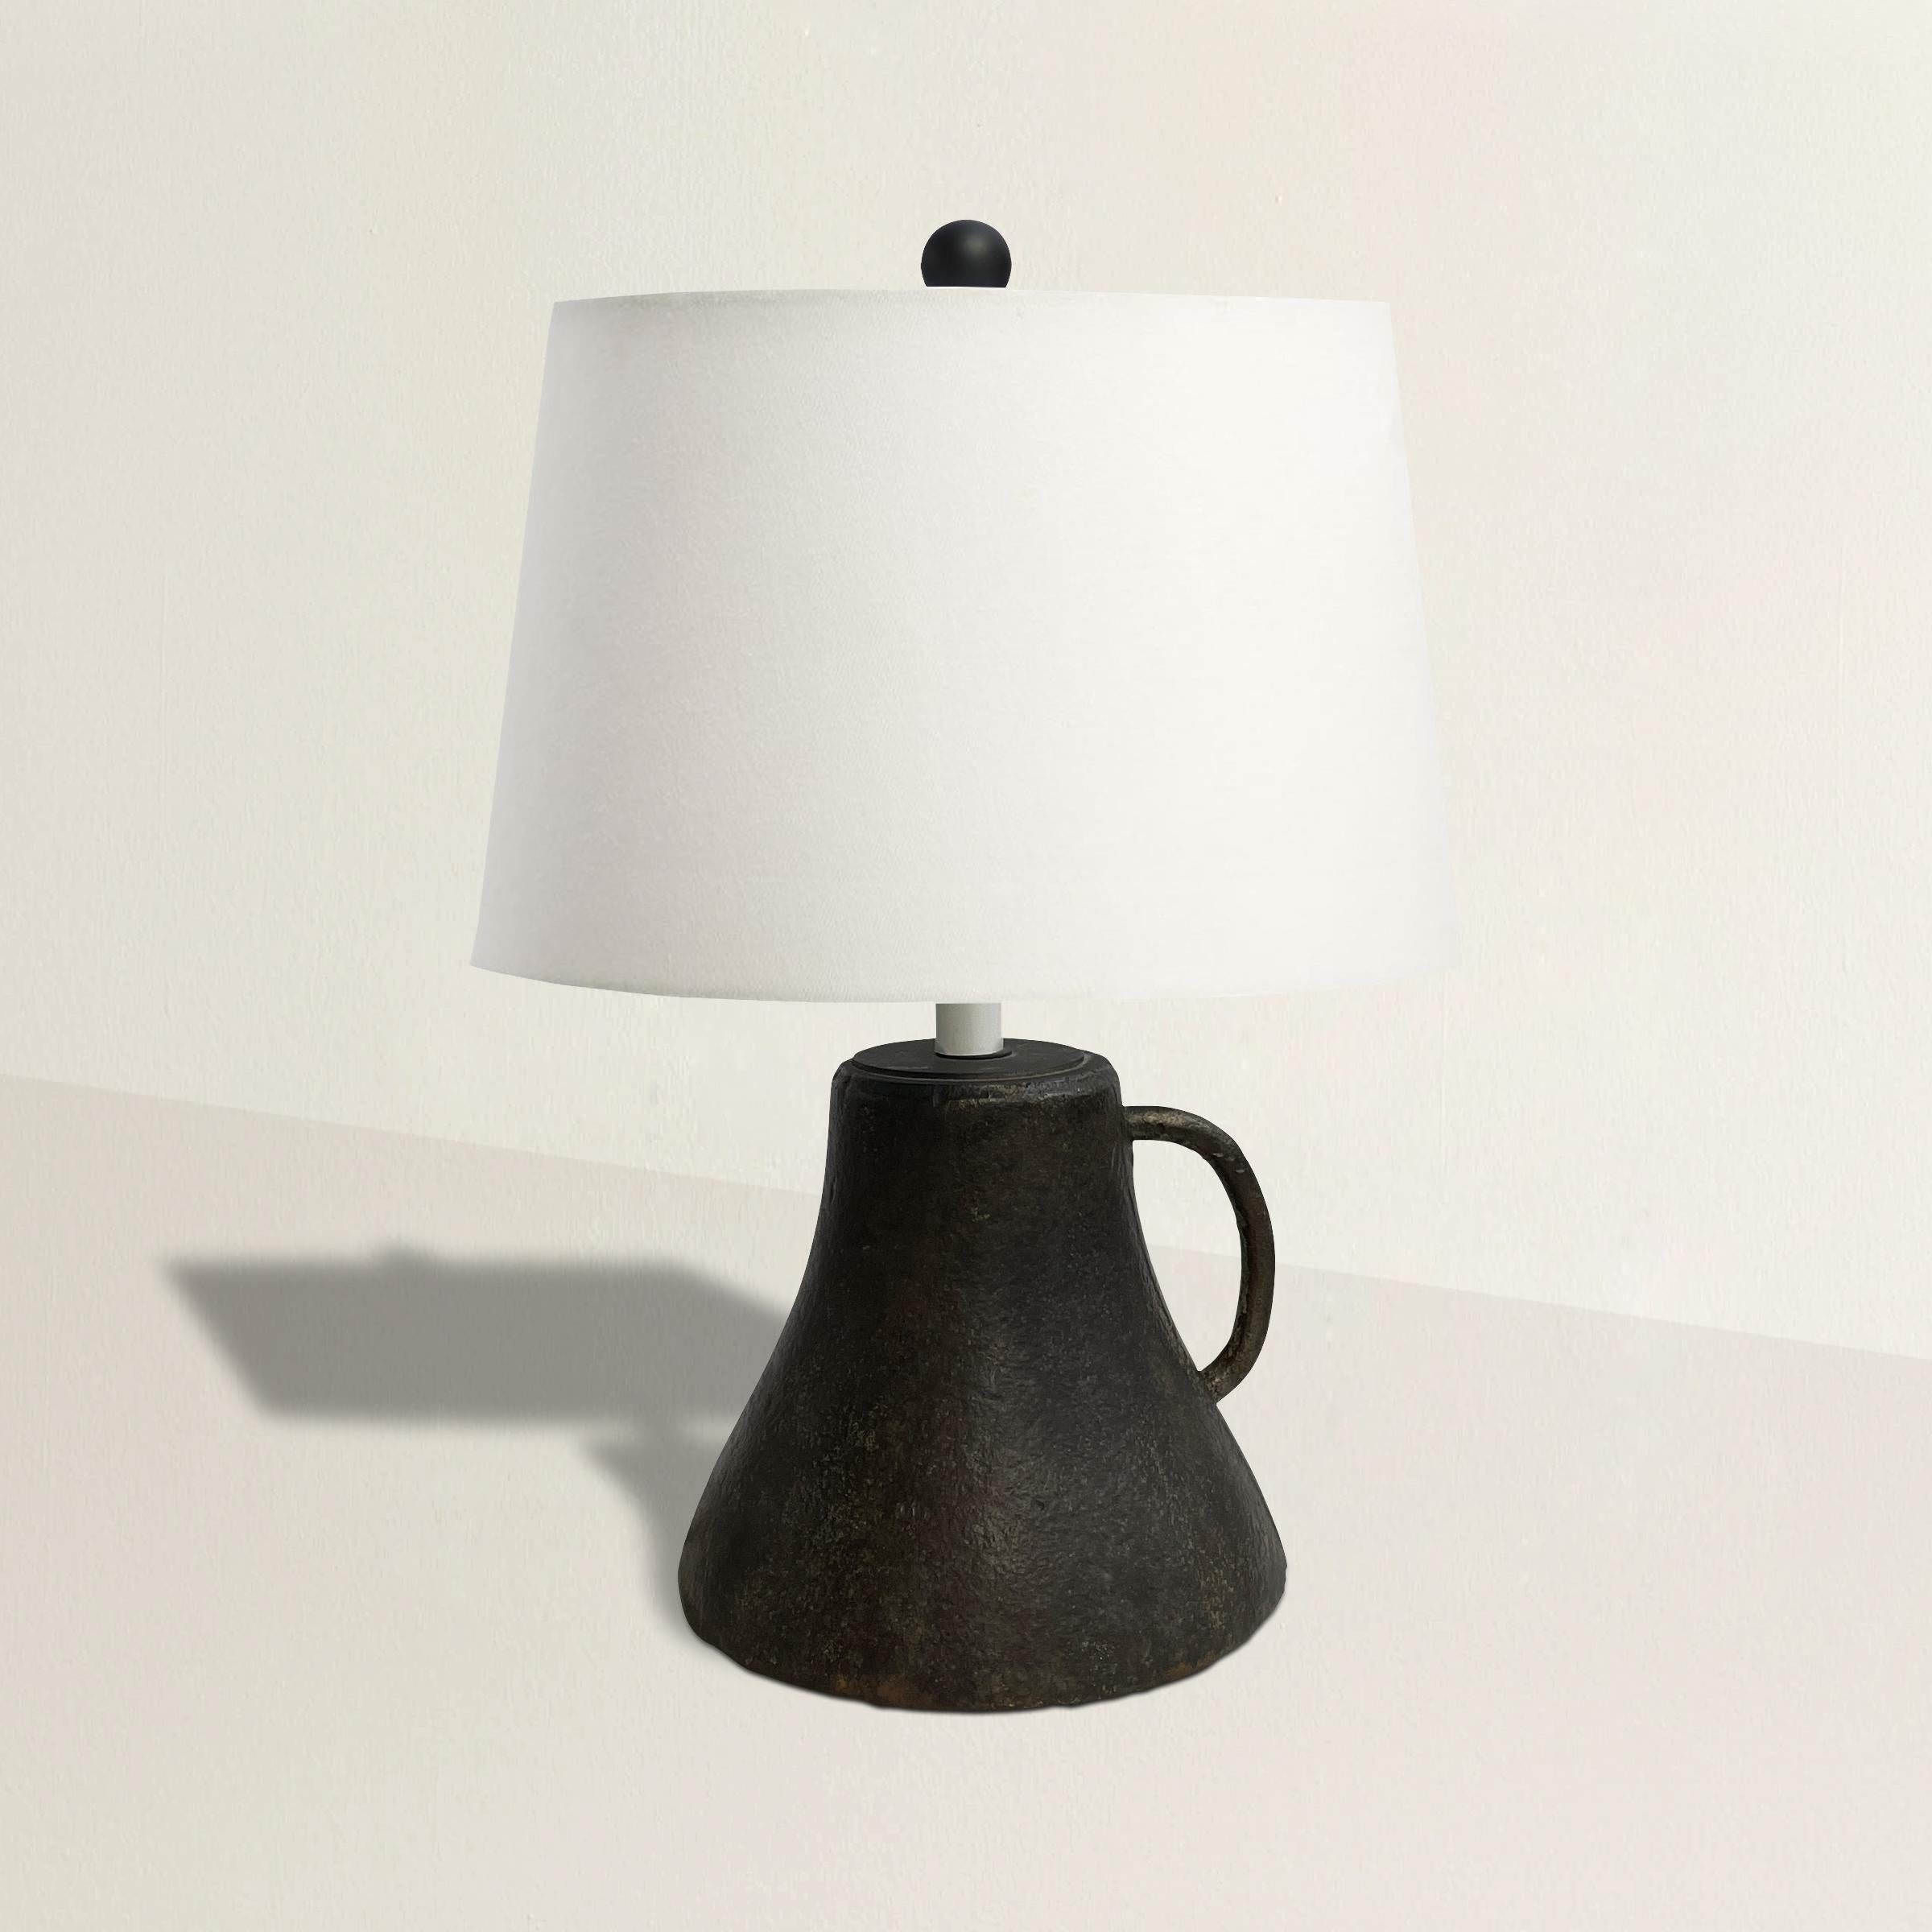 A bold and chic 18th century French iron mortar turned into a table lamp, with a new linen shade. Wired for US.